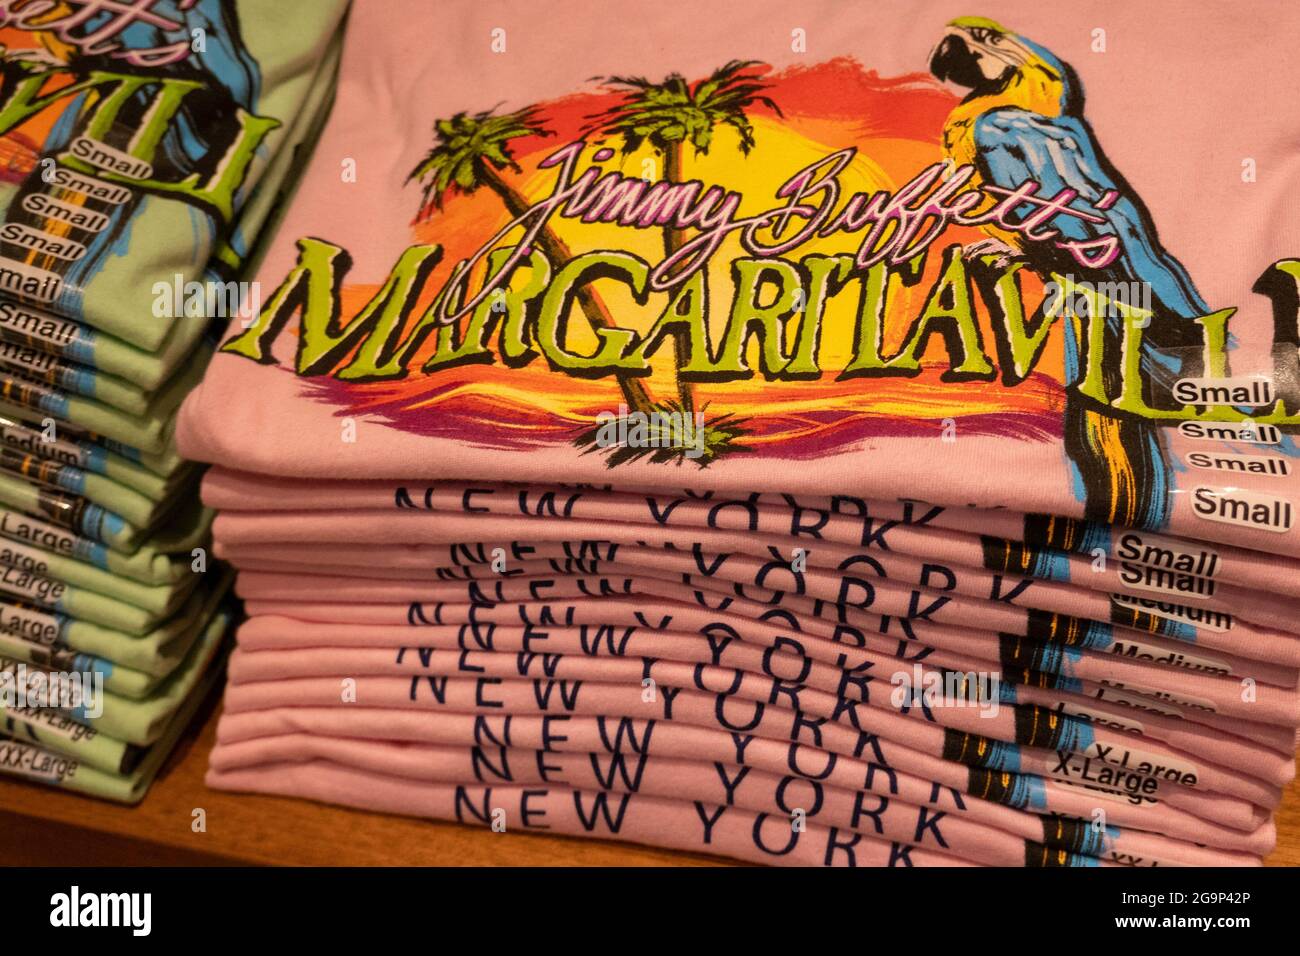 Margaritaville Resort Times Square is a Jimmy Buffett property in New York City, USA Stock Photo